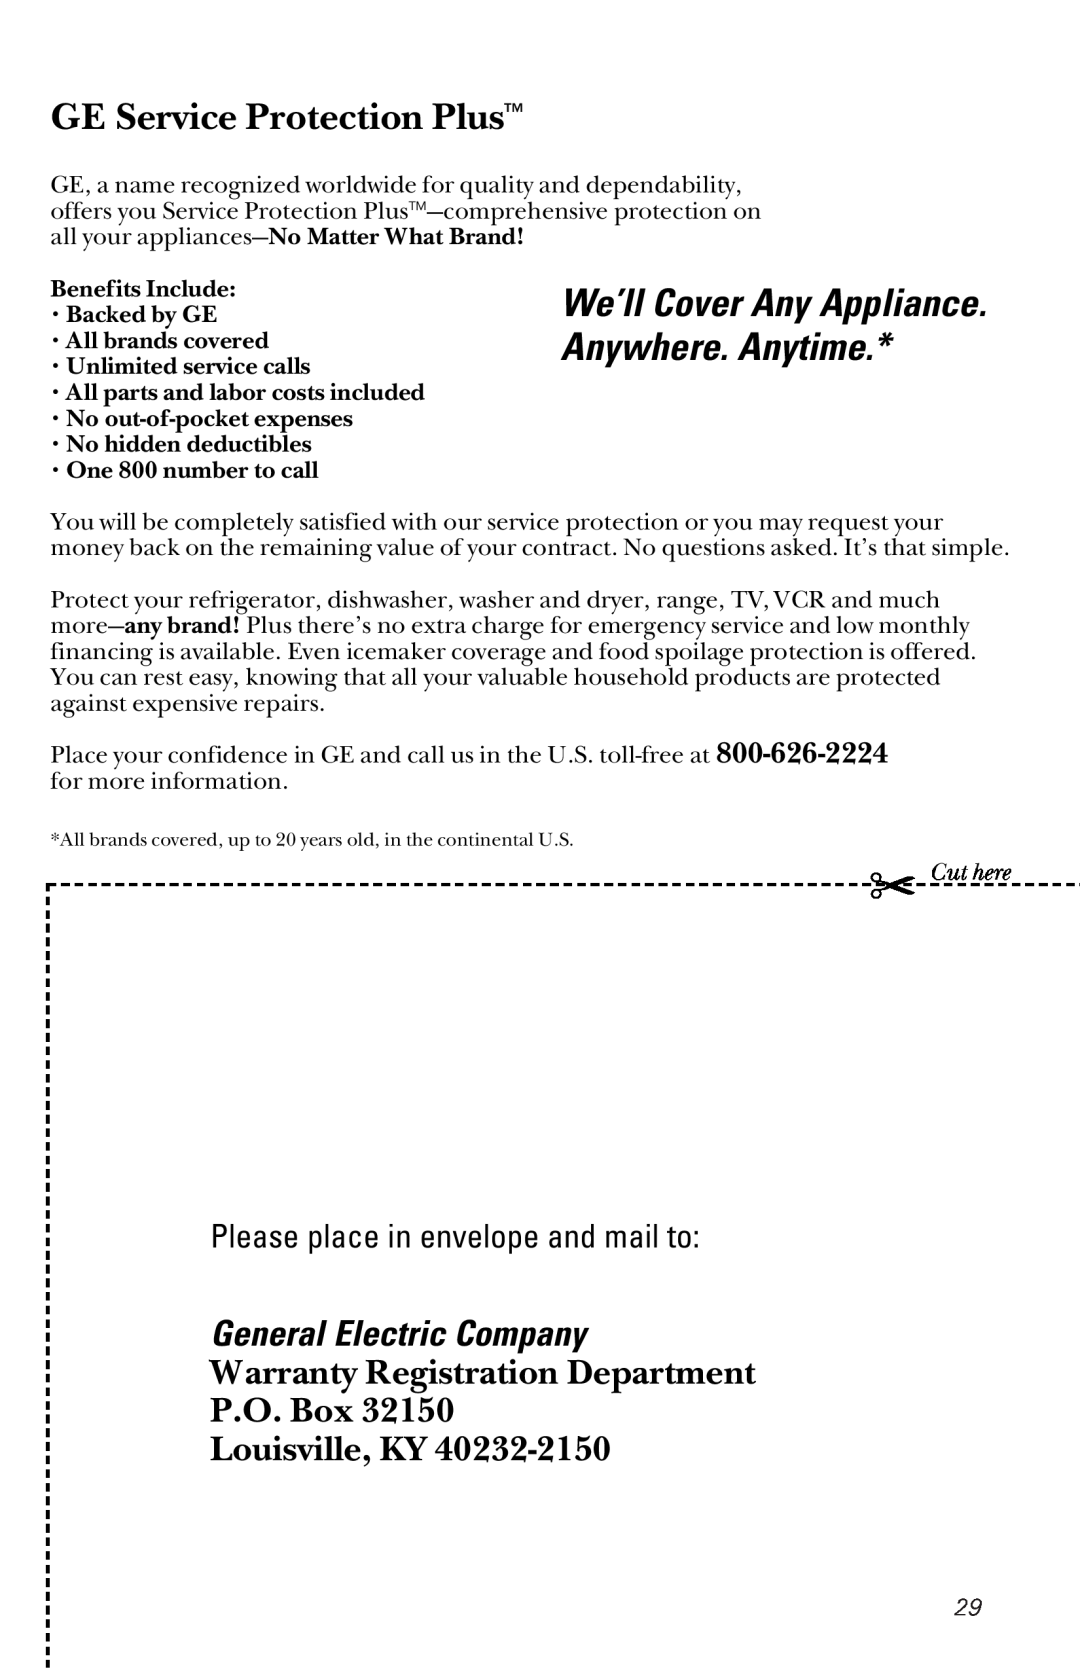 GE GSD5130 Cut here, GE Service Protection Plus, We’ll Cover Any Appliance. Anywhere. Anytime, General Electric Company 